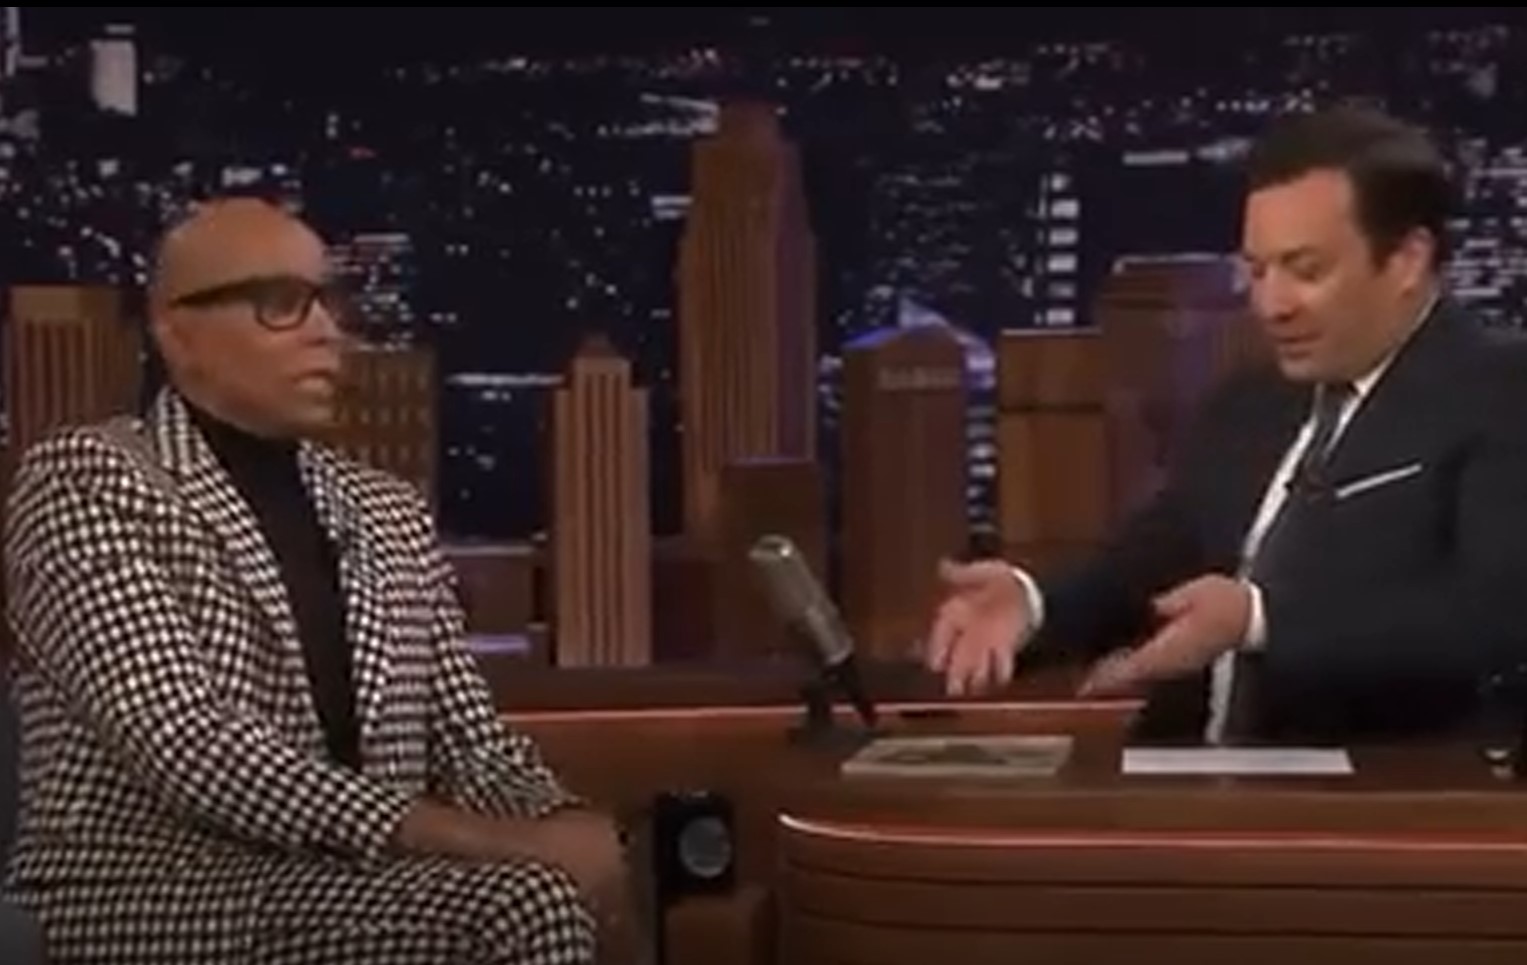 Fallon showed RuPaul a magazine with RuPaul on the cover. Image Credit: The Tonight Show